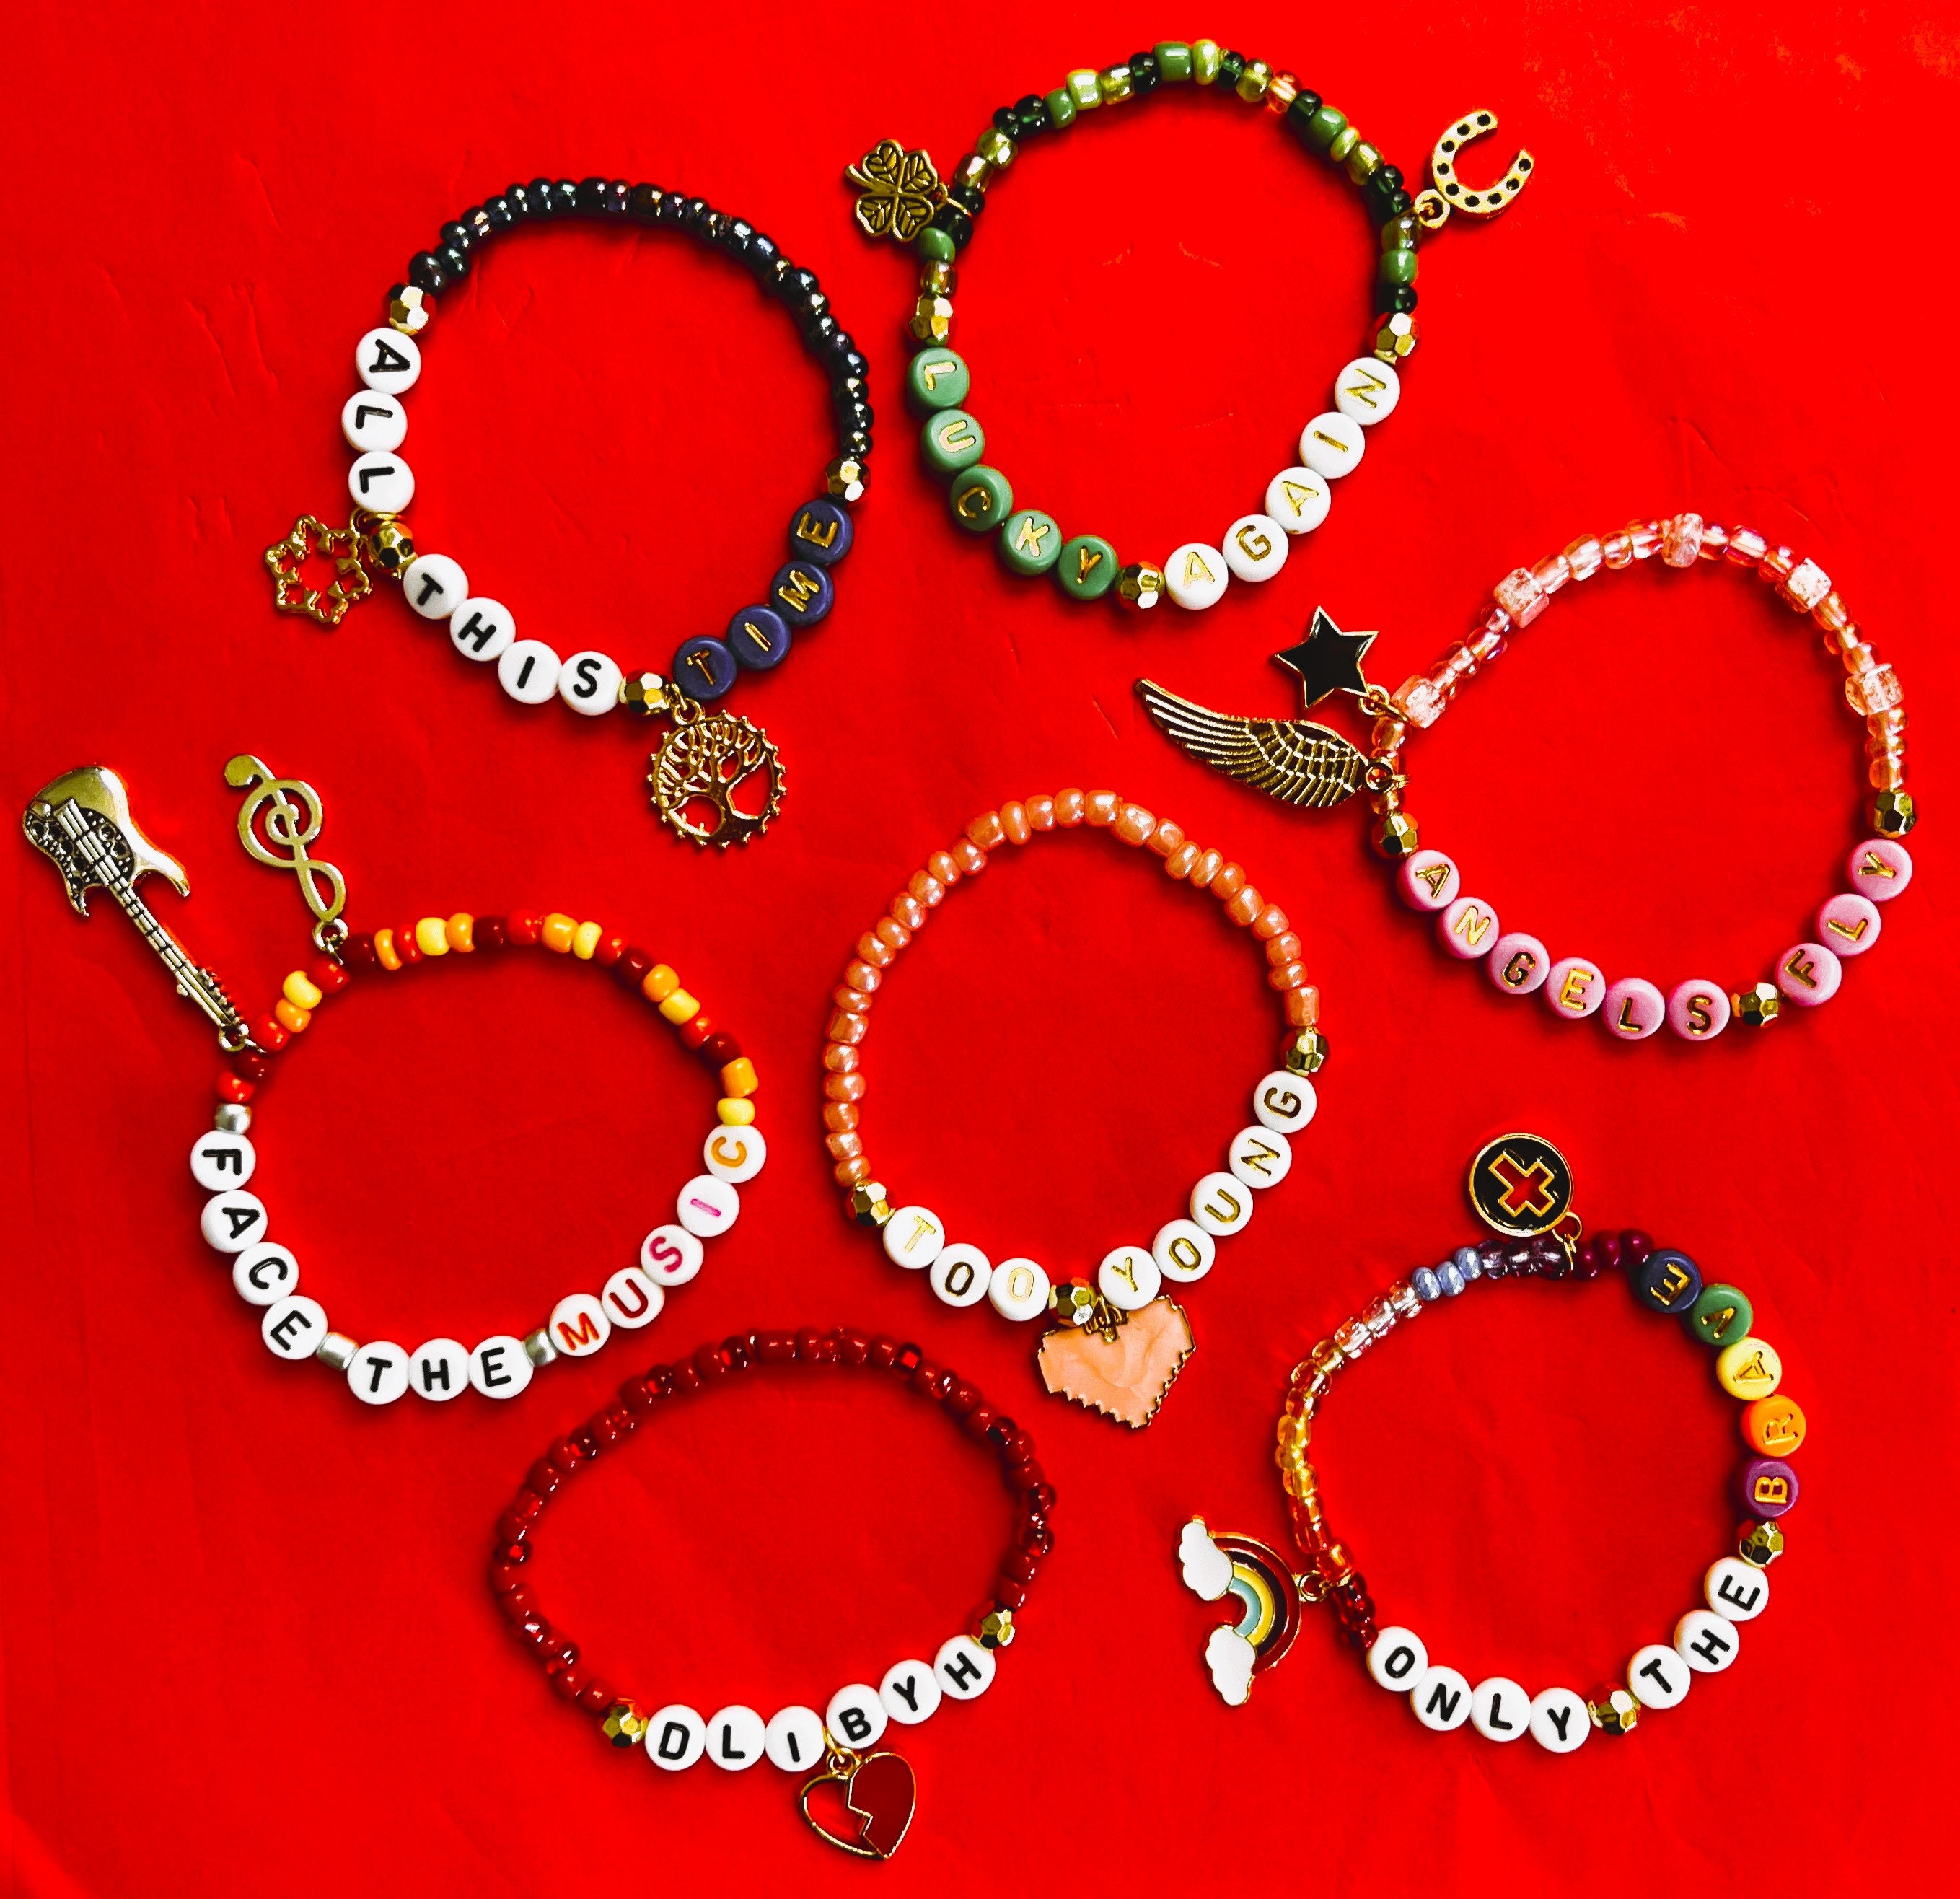 5-Pack *Louis TOMLINSON* Friendship Bracelets with Charms